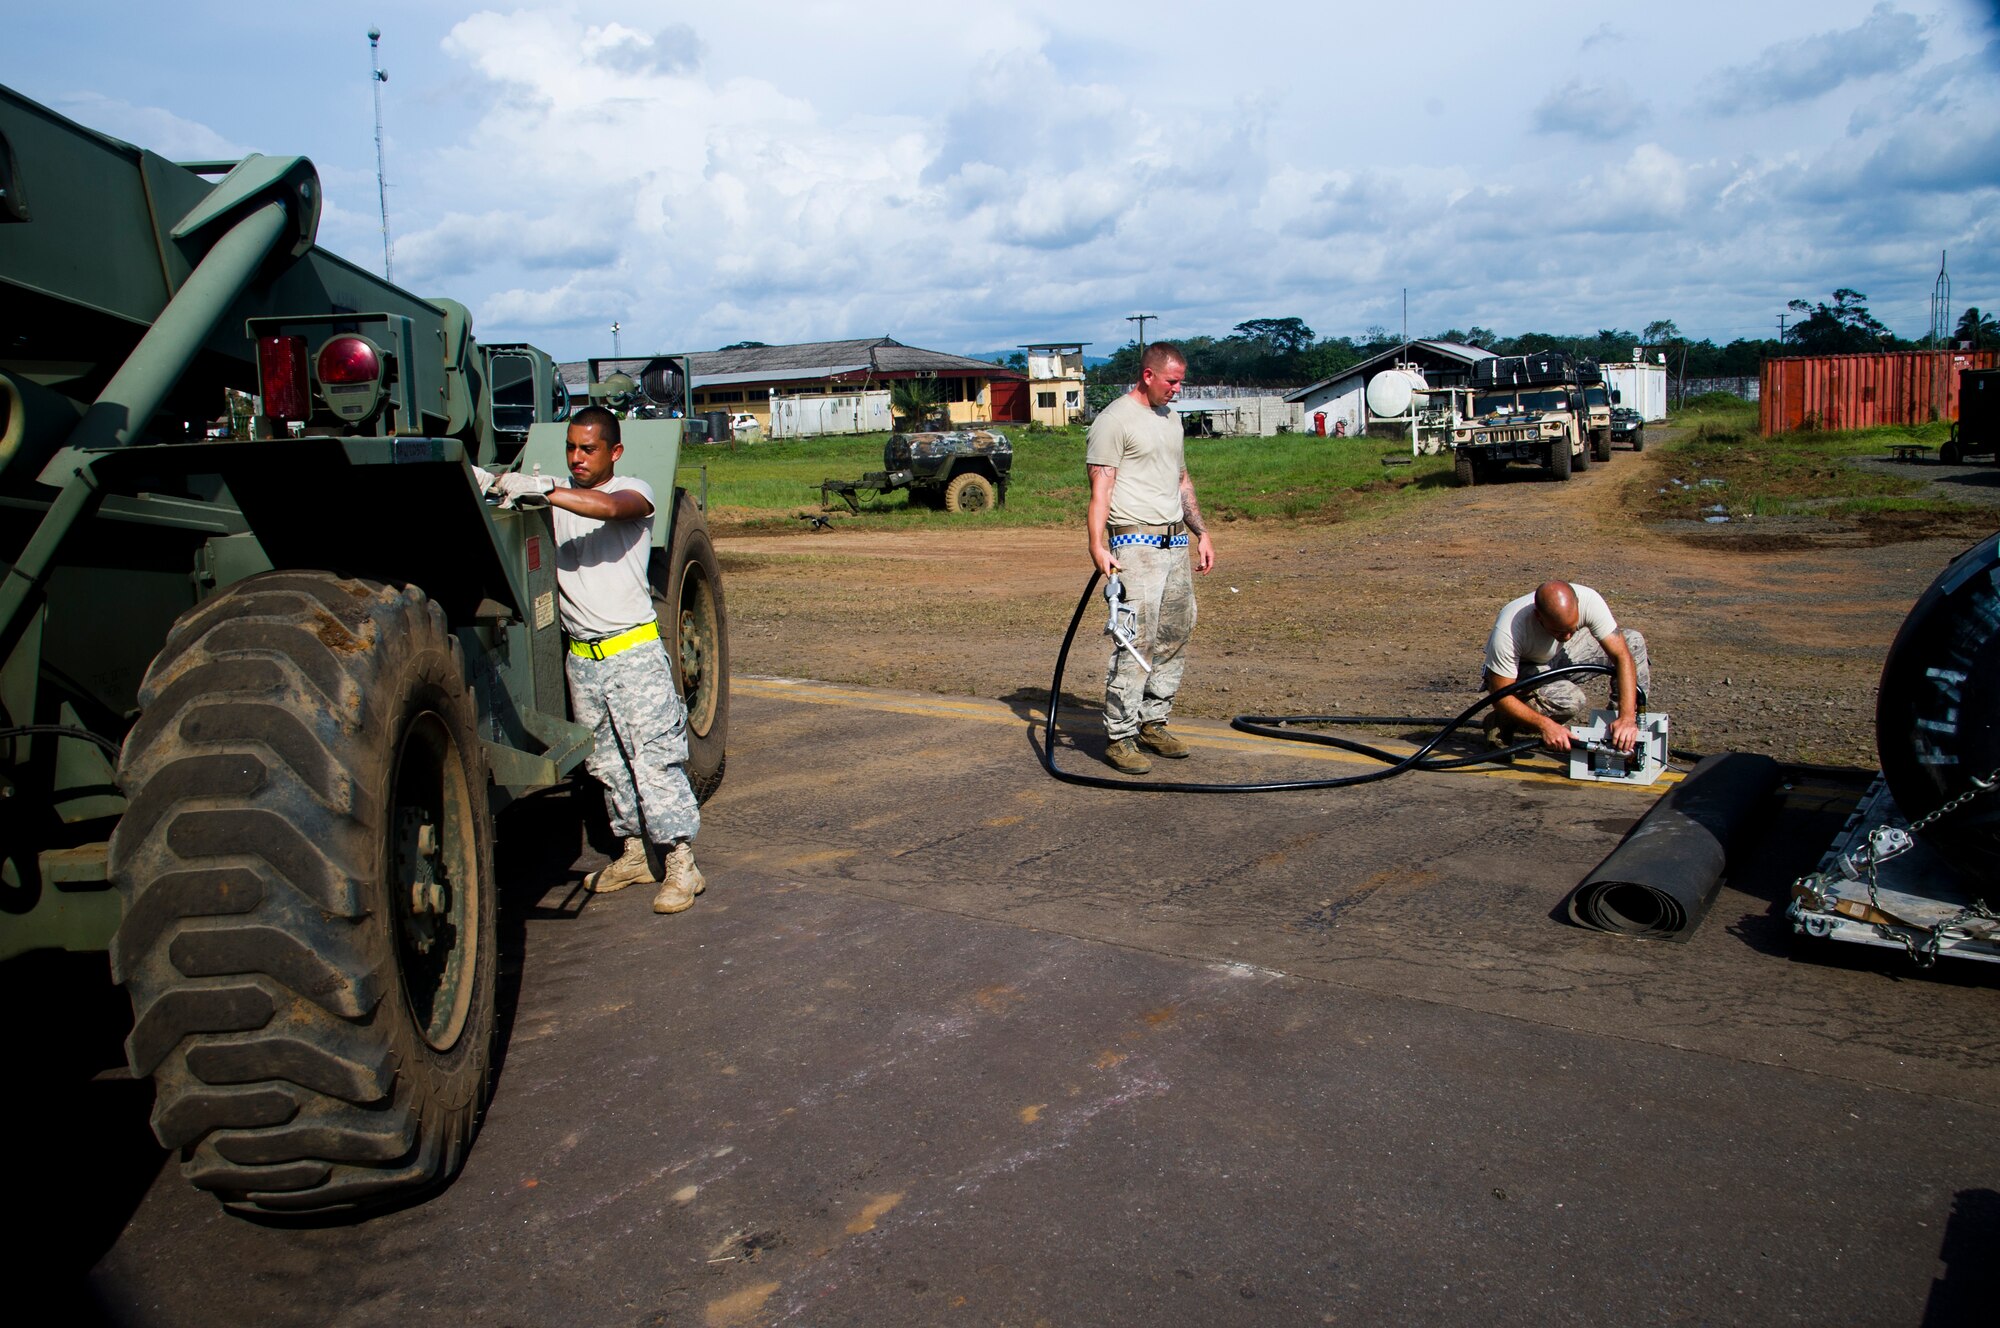 ROBERTS INTERNATIONAL AIRPORT, Republic of Liberia - U.S. Army SPC Michael Gil, 688th Rapid Port Opening Element cargo specialist assigned to Joint Base Langley-Eustis, Va., 621st Contingency Response Wing U.S. Air Force aerial porter Staff Sgt. James Cain, and Staff Sgt. Josh Zanek, electrical power production craftsman, both stationed at Joint Base McGuire-Dix-Lakehurst, N.J., prepare a forklift to be refueled during Operation UNITED ASSISTANCE here, October 17, 2014. The Airmen and Soldier are a part of the Joint Task Force Port-Opening team that consists of approximately 79 members of the CRW and 10 Soldiers from the RPOE. (U.S. Air Force photo/Staff Sgt. Gustavo Gonzalez/RELEASED)